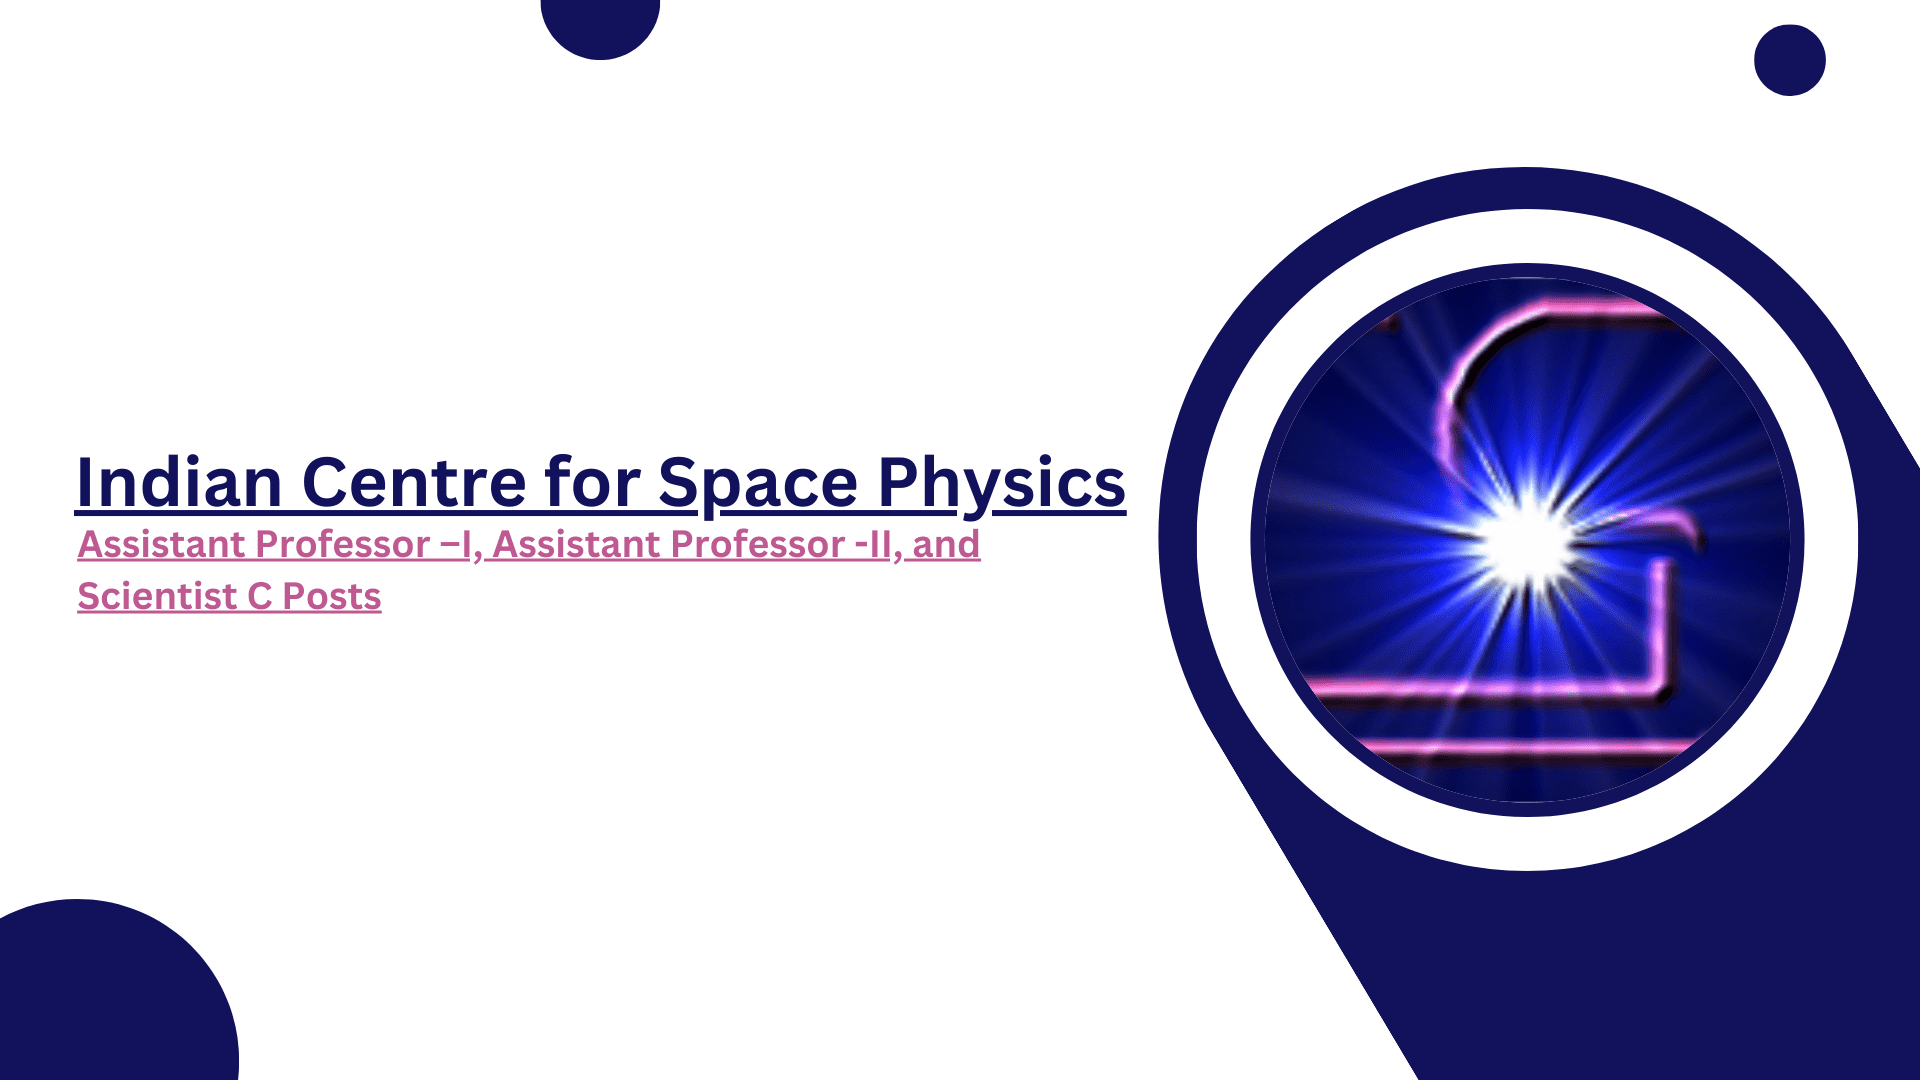 Indian Centre for Space Physics